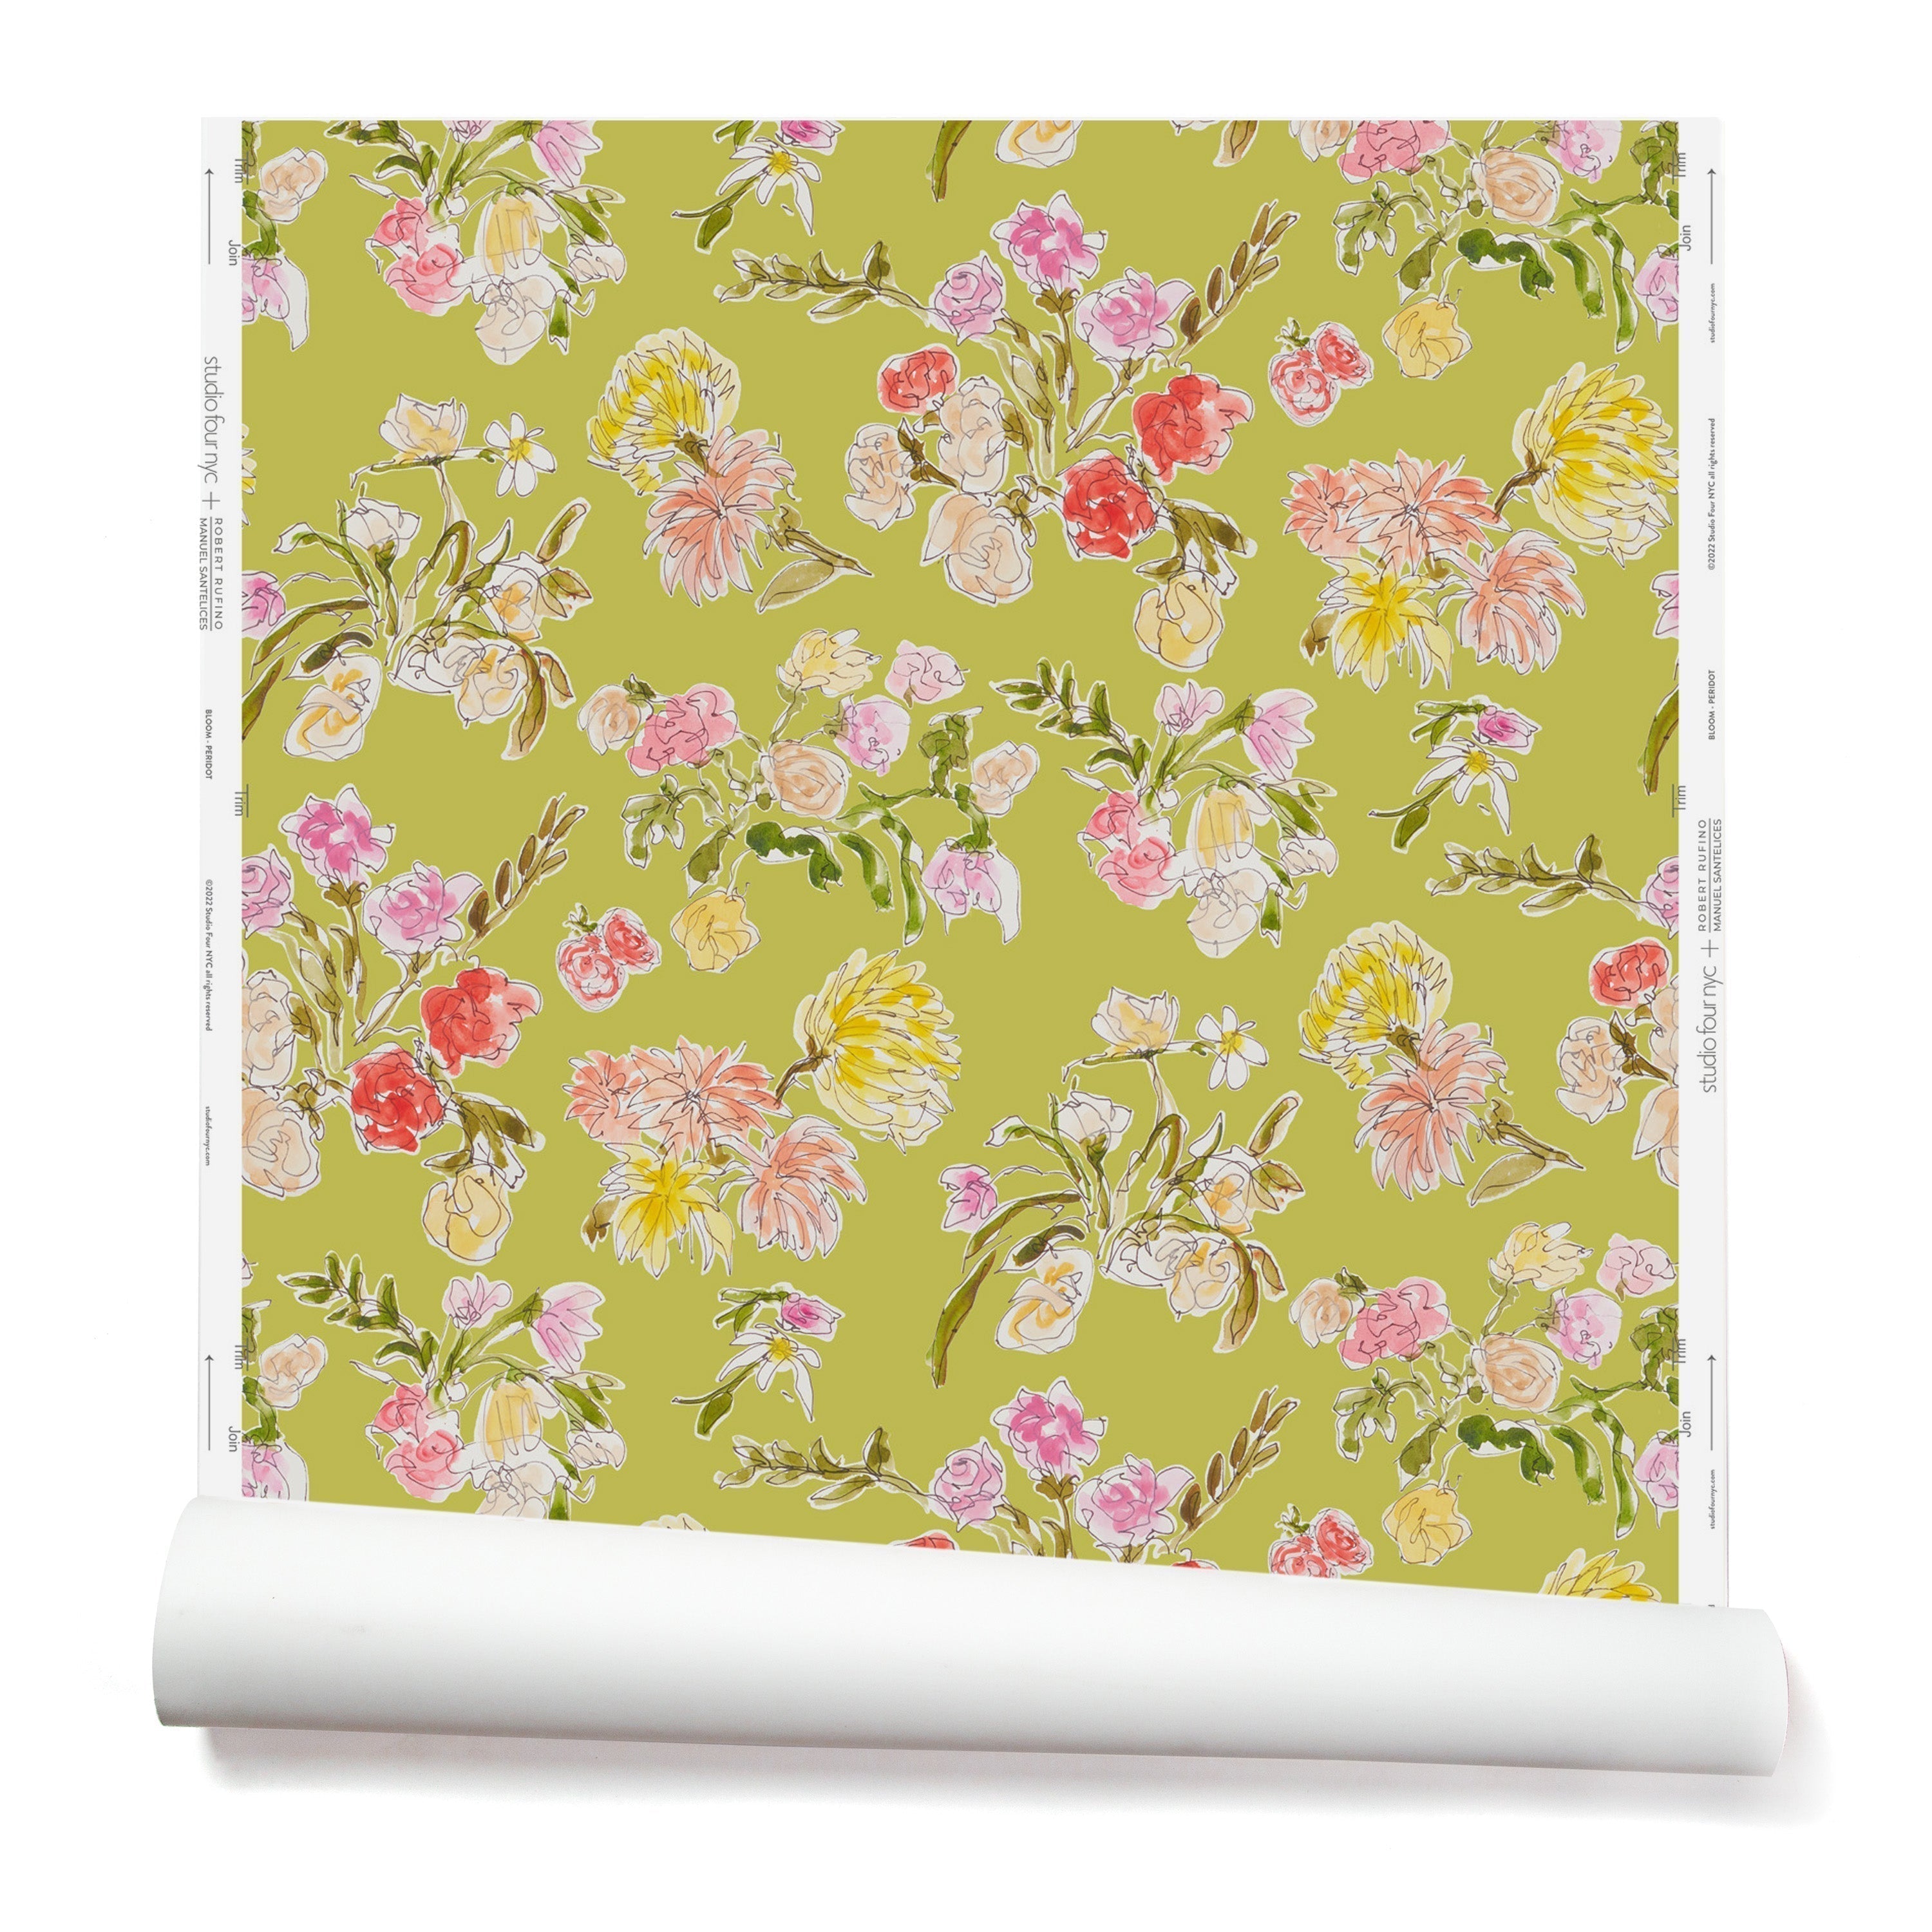 Partially unrolled wallpaper with a pattern of large-scale line-drawn flowers in gray ink with red, pink and yellow watercolors, on a light green background.